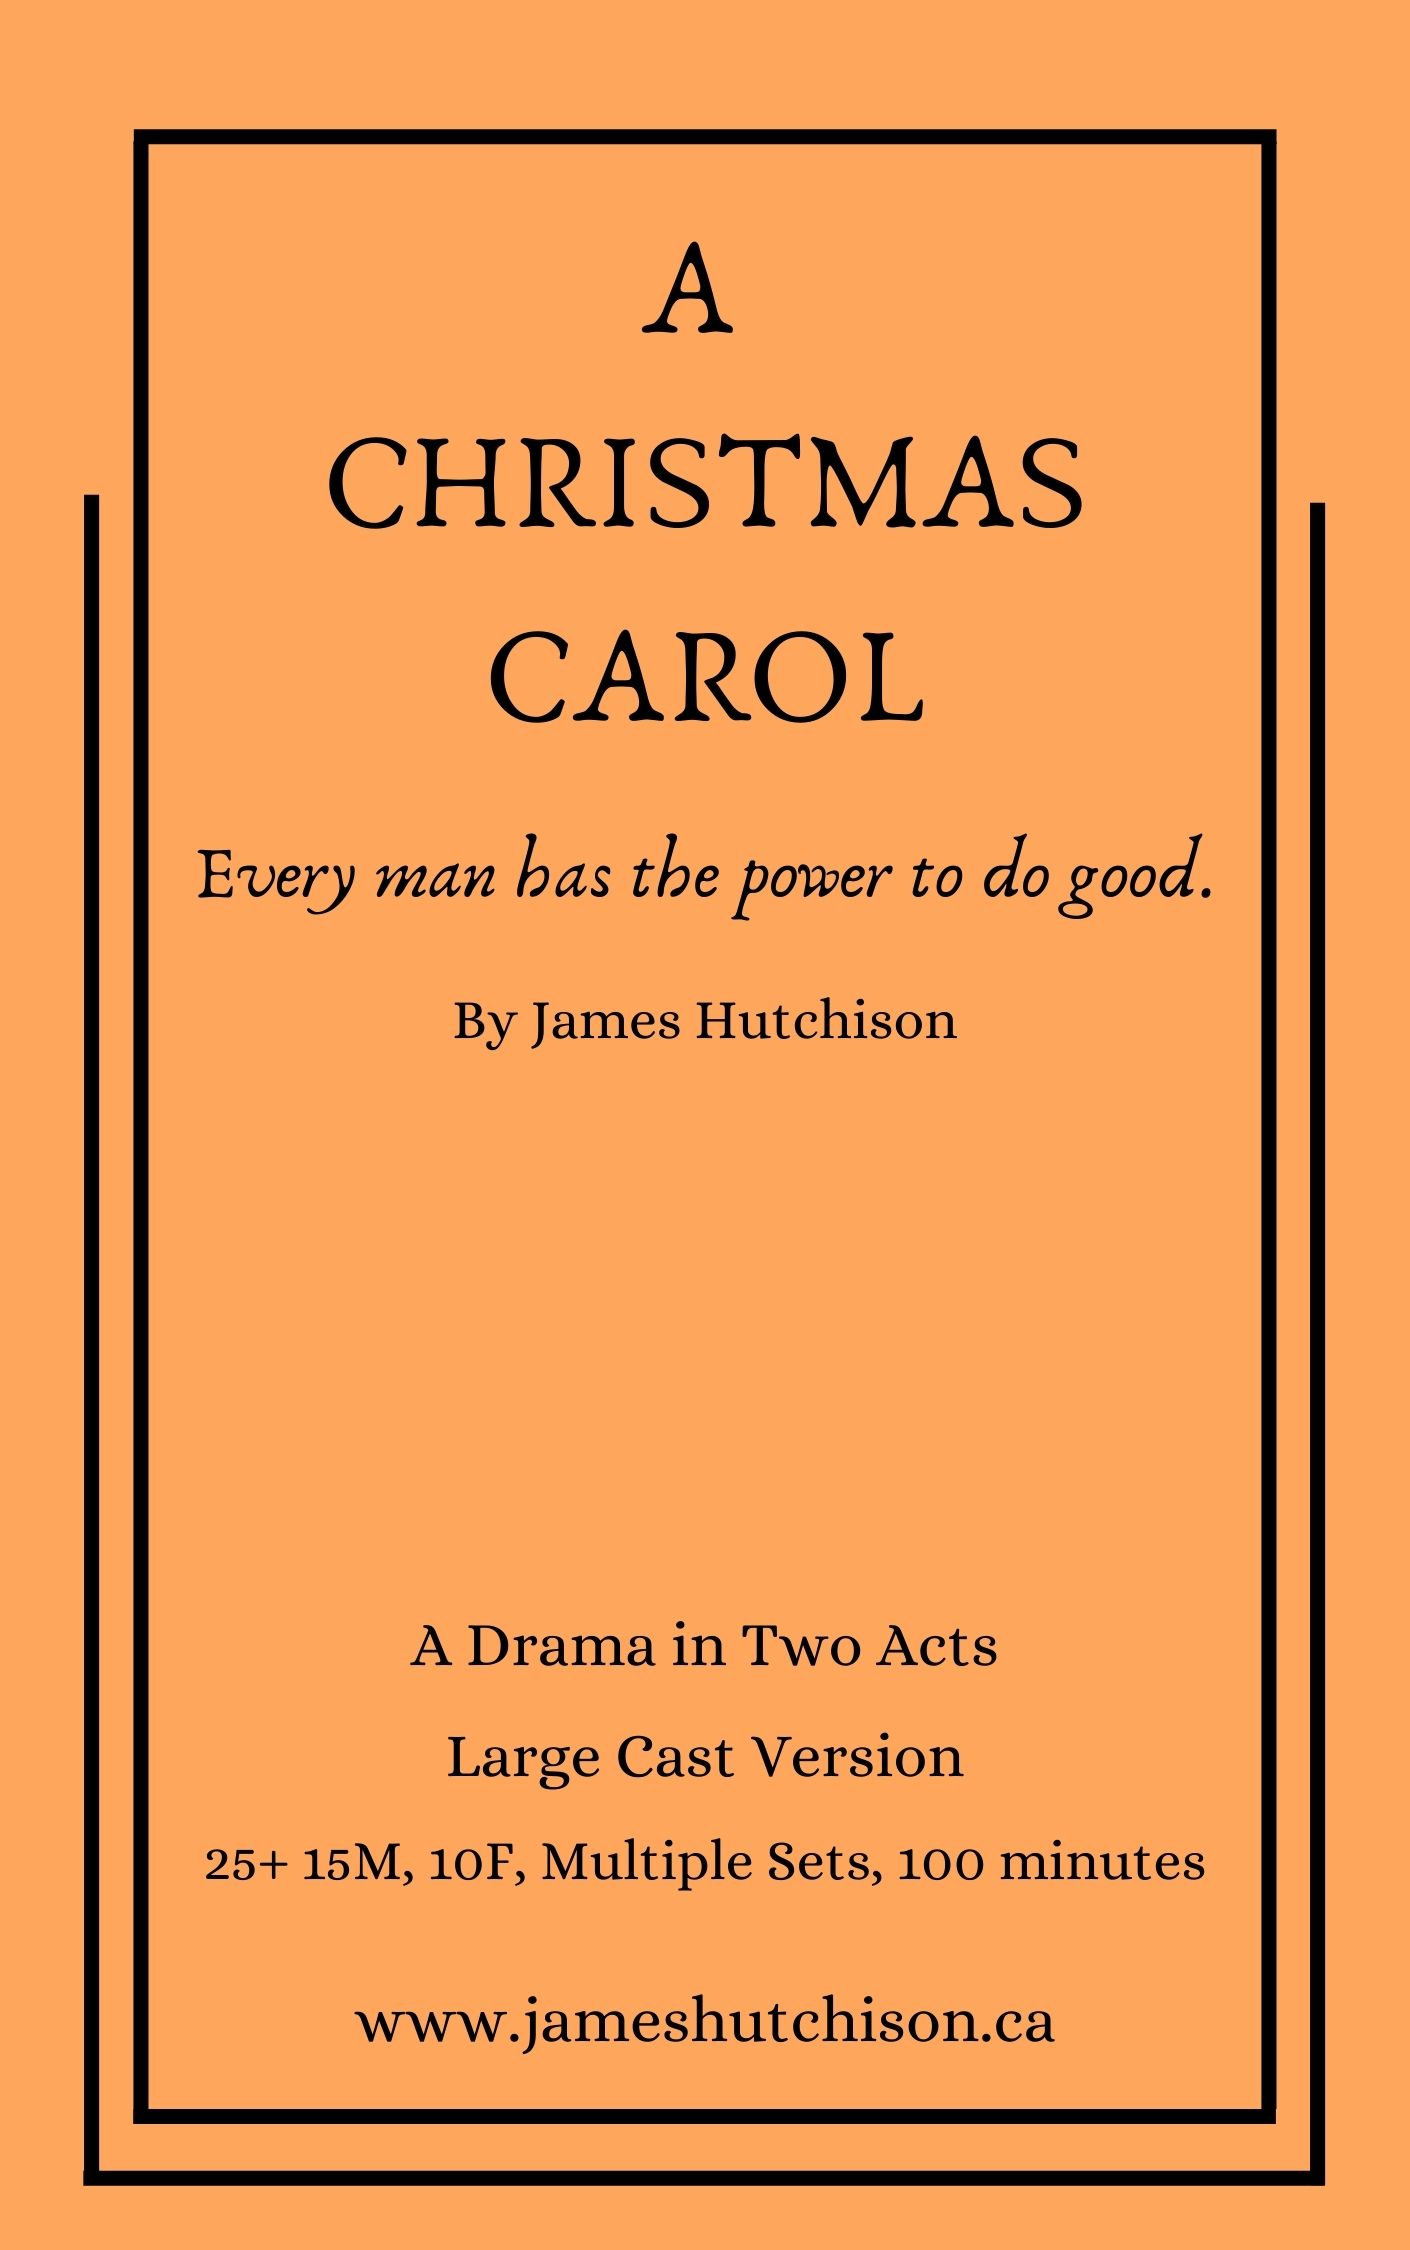 Four Christmas Play Scripts for Theatre - James Hutchison